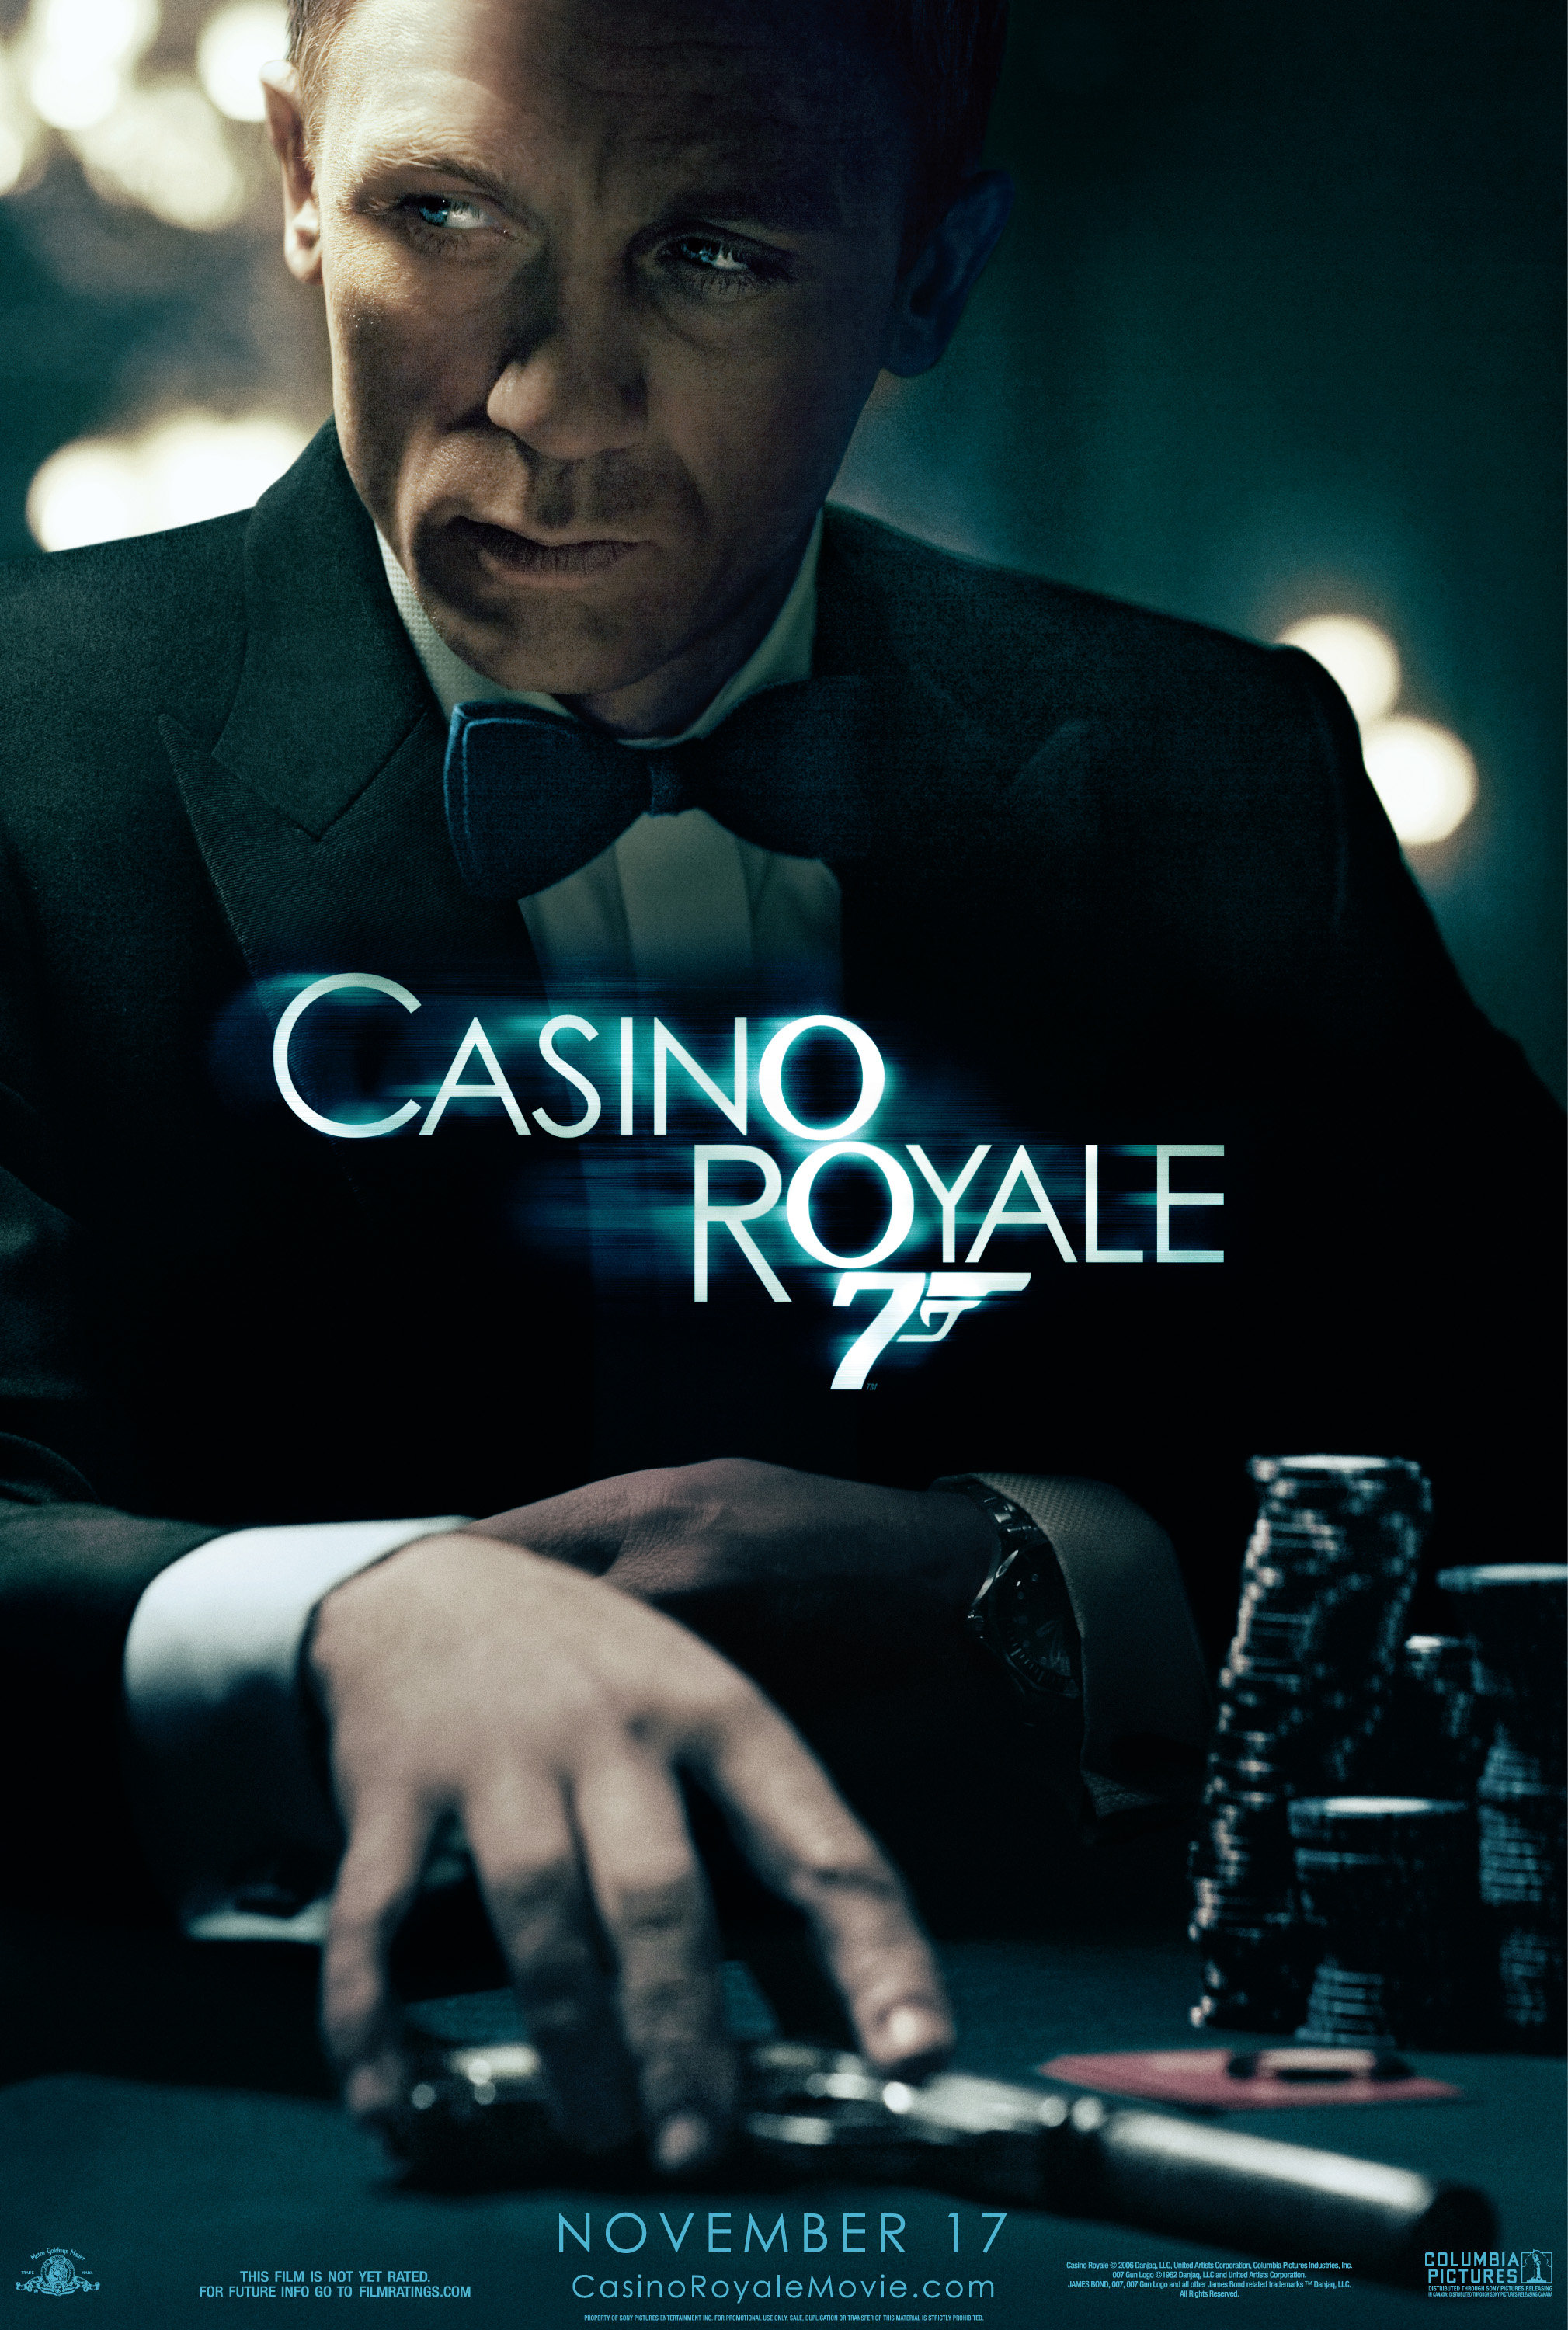 Memorable and Interesting Casino Royale Quotes